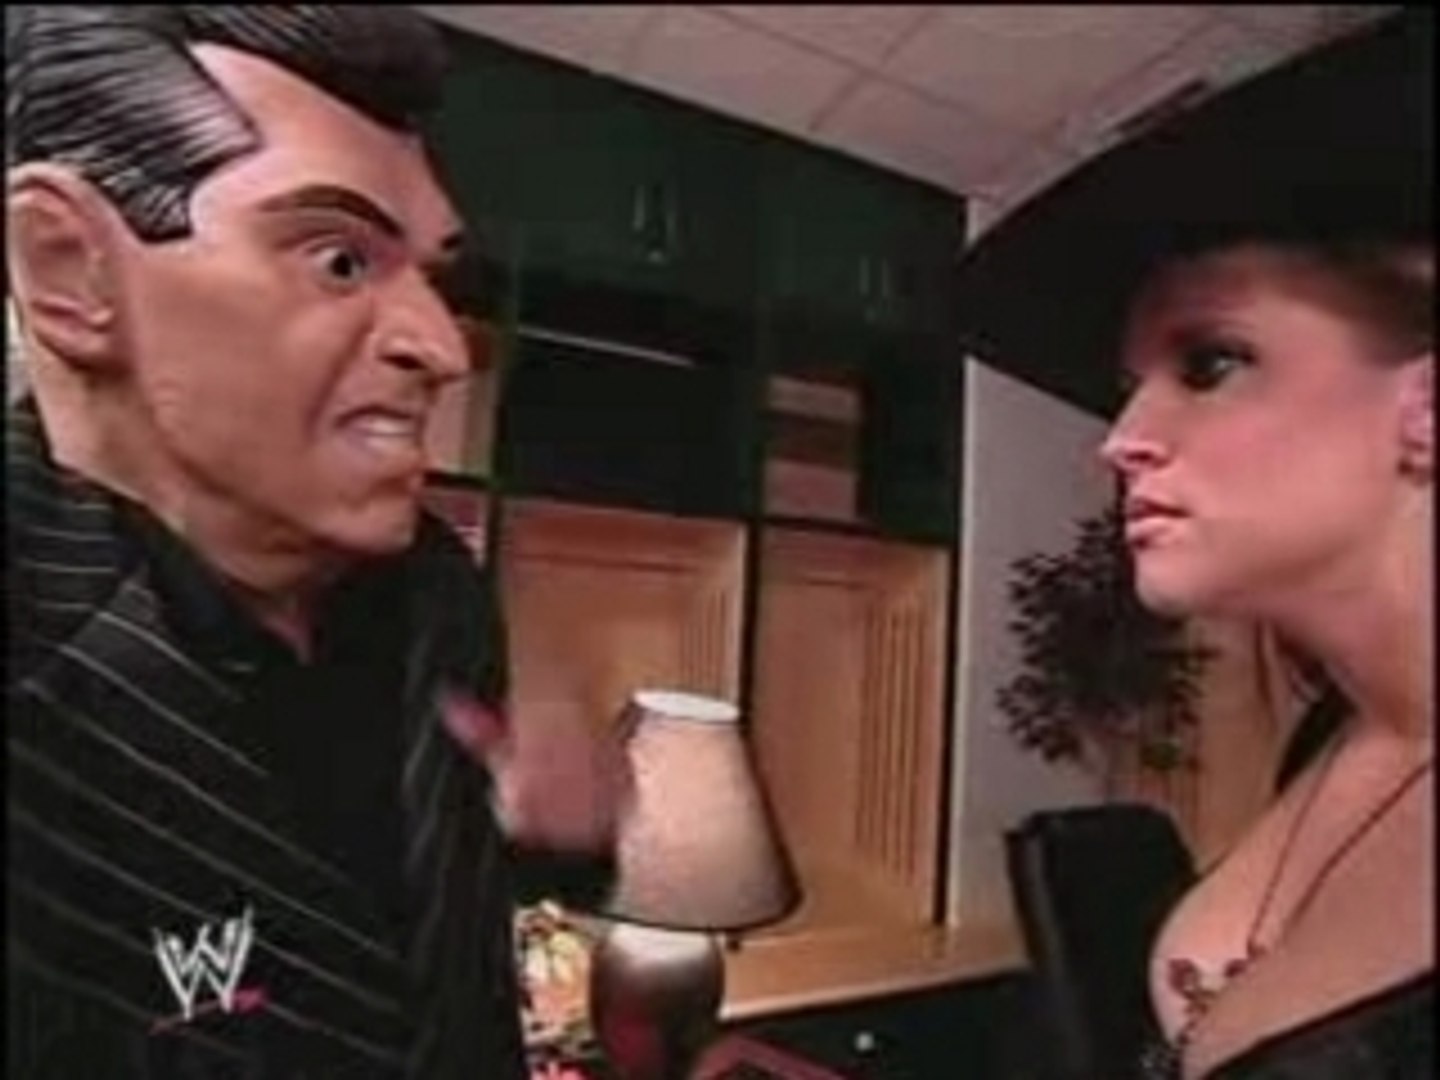 Stephanie Mcmahon Hot Sex Scene - Eric Bischoff & Stephanie McMahon kiss on Smackdown! - video Dailymotion